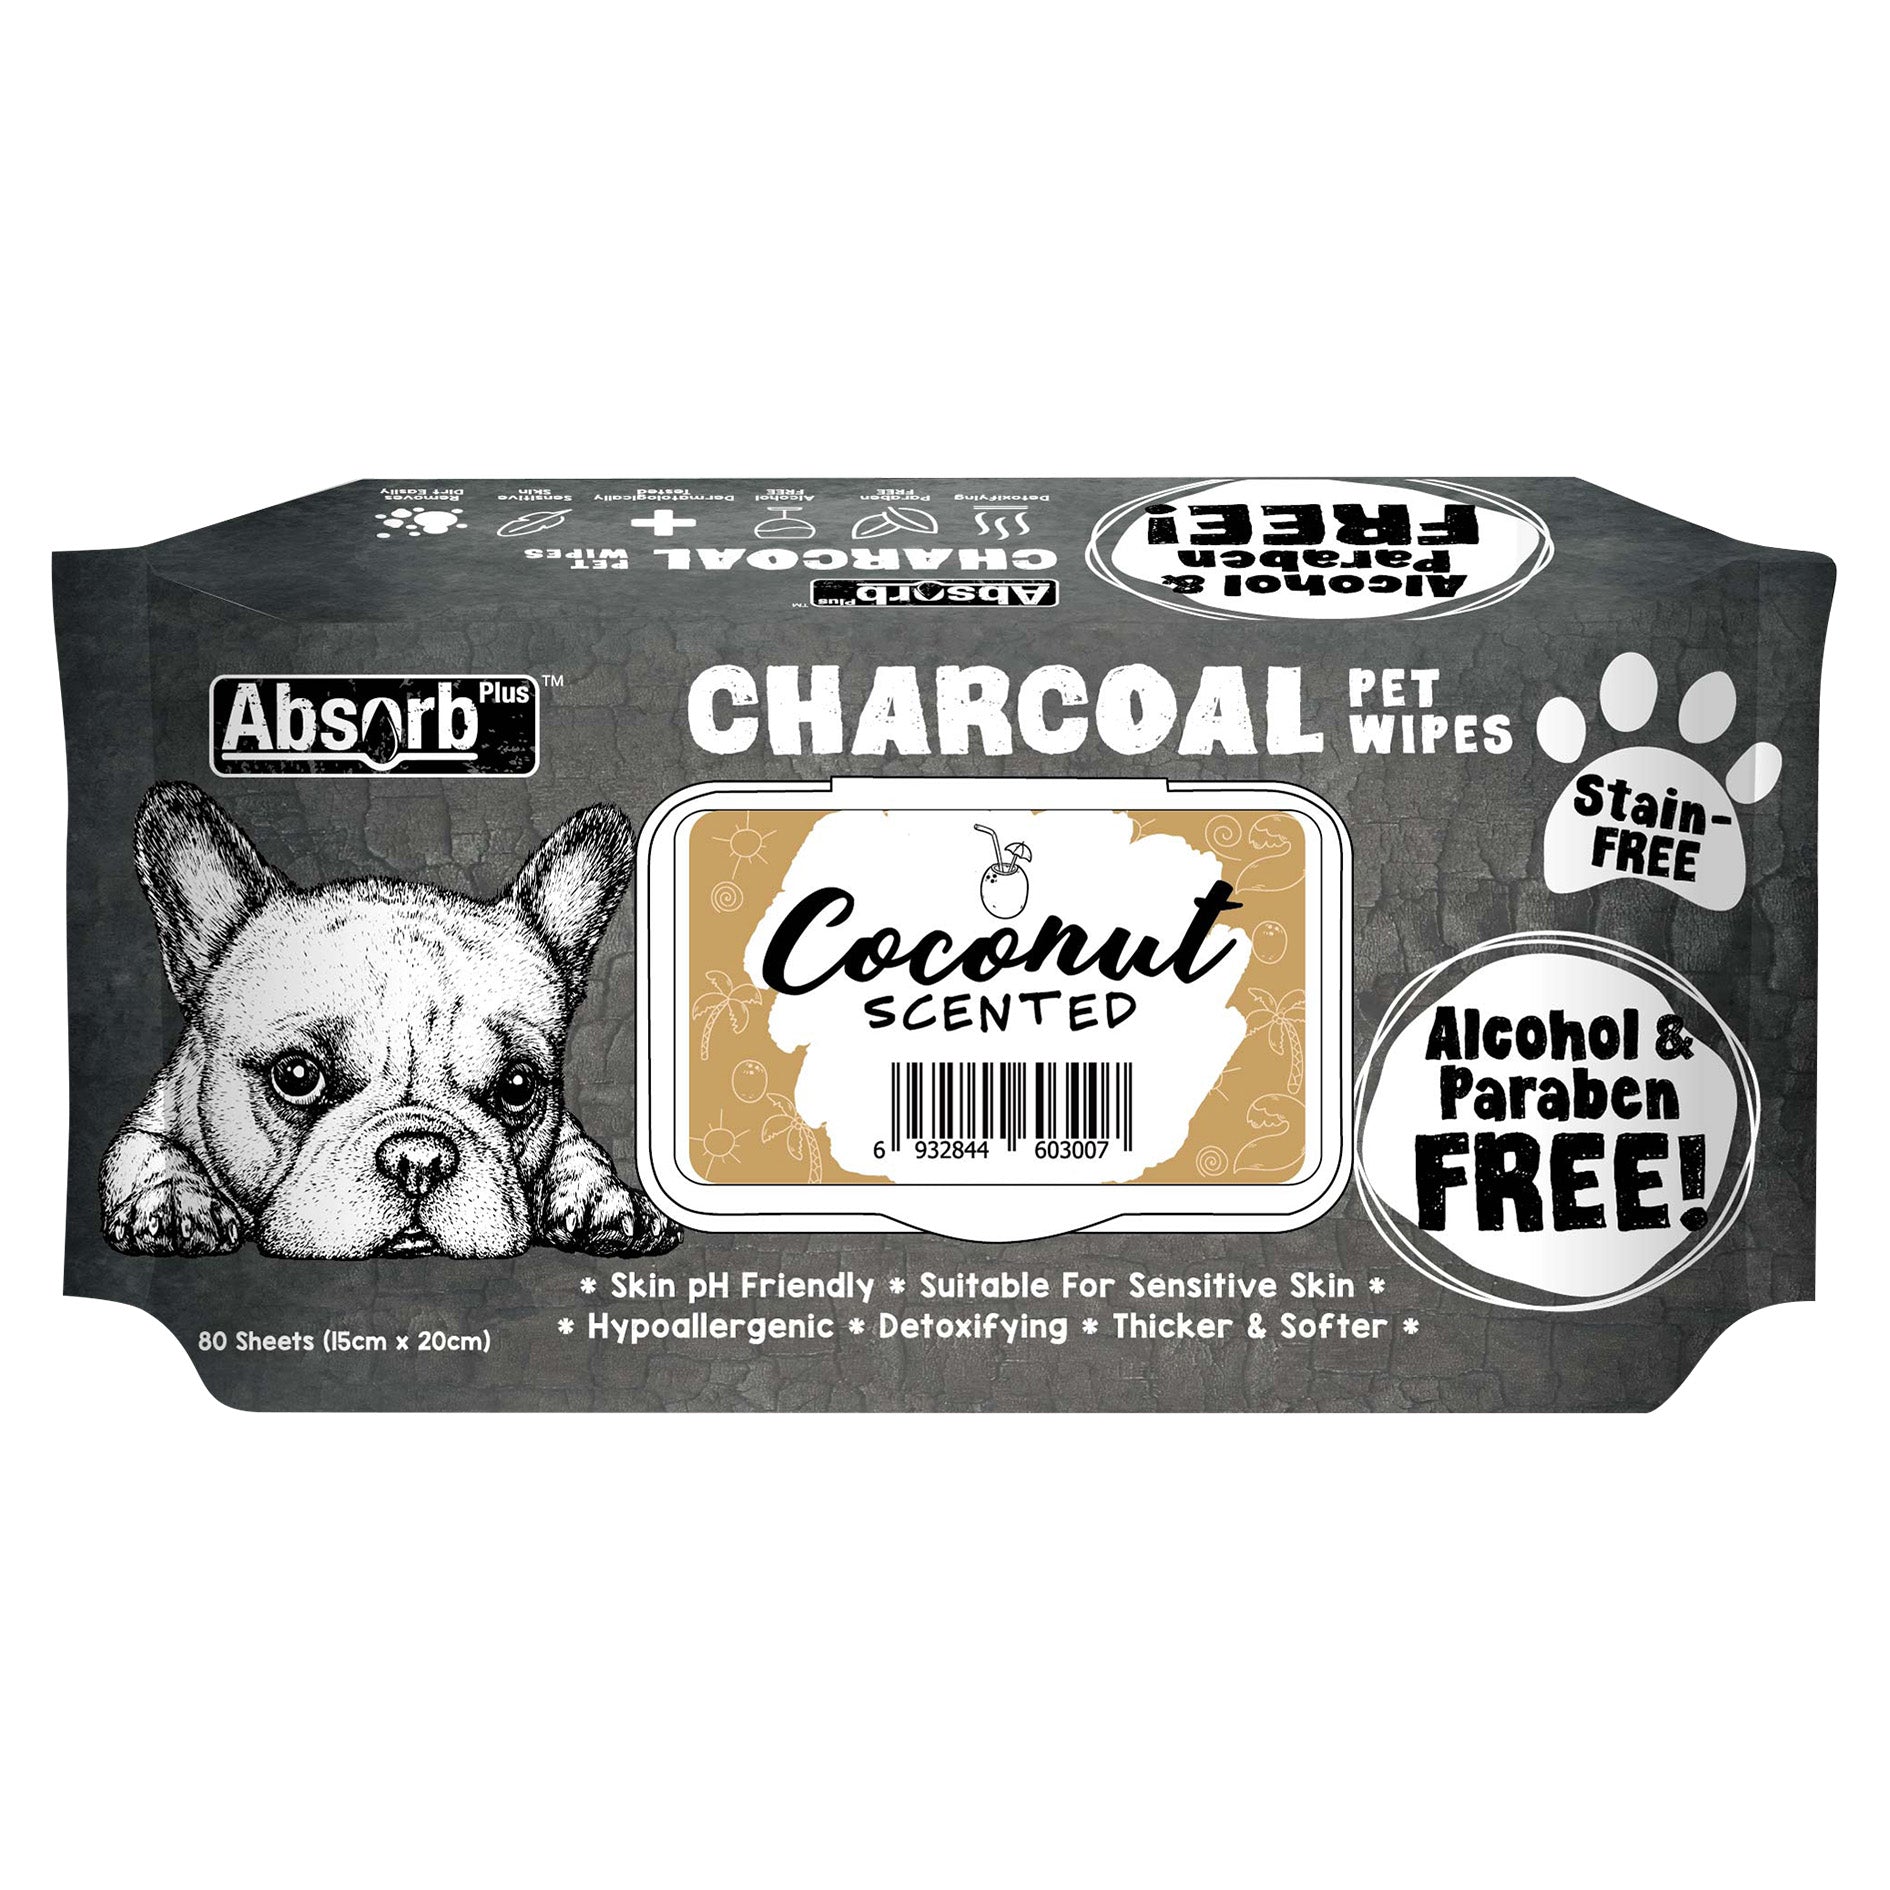 Copy of Absorb Plus Charcoal Wet Wipes - Coconut (6968591679649)